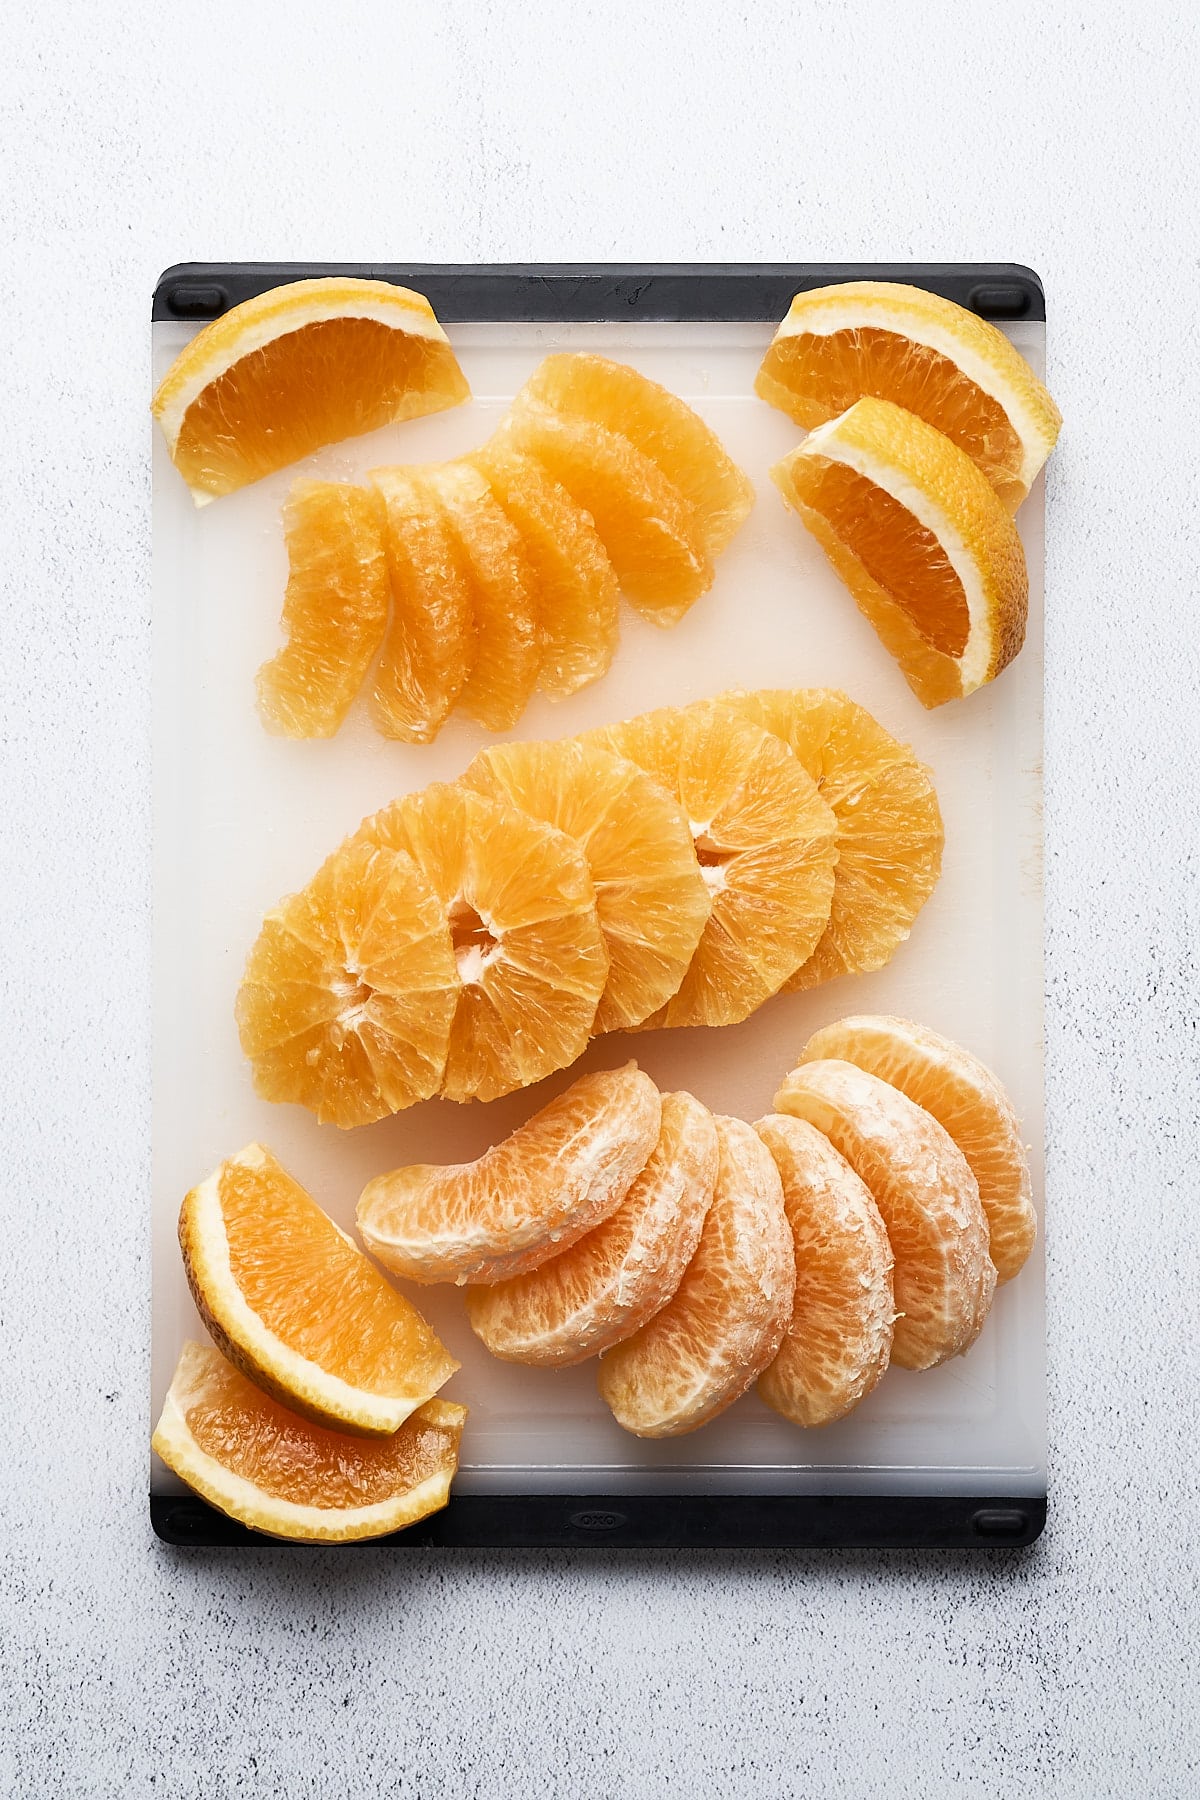 Different cuts of oranges on a cutting board.